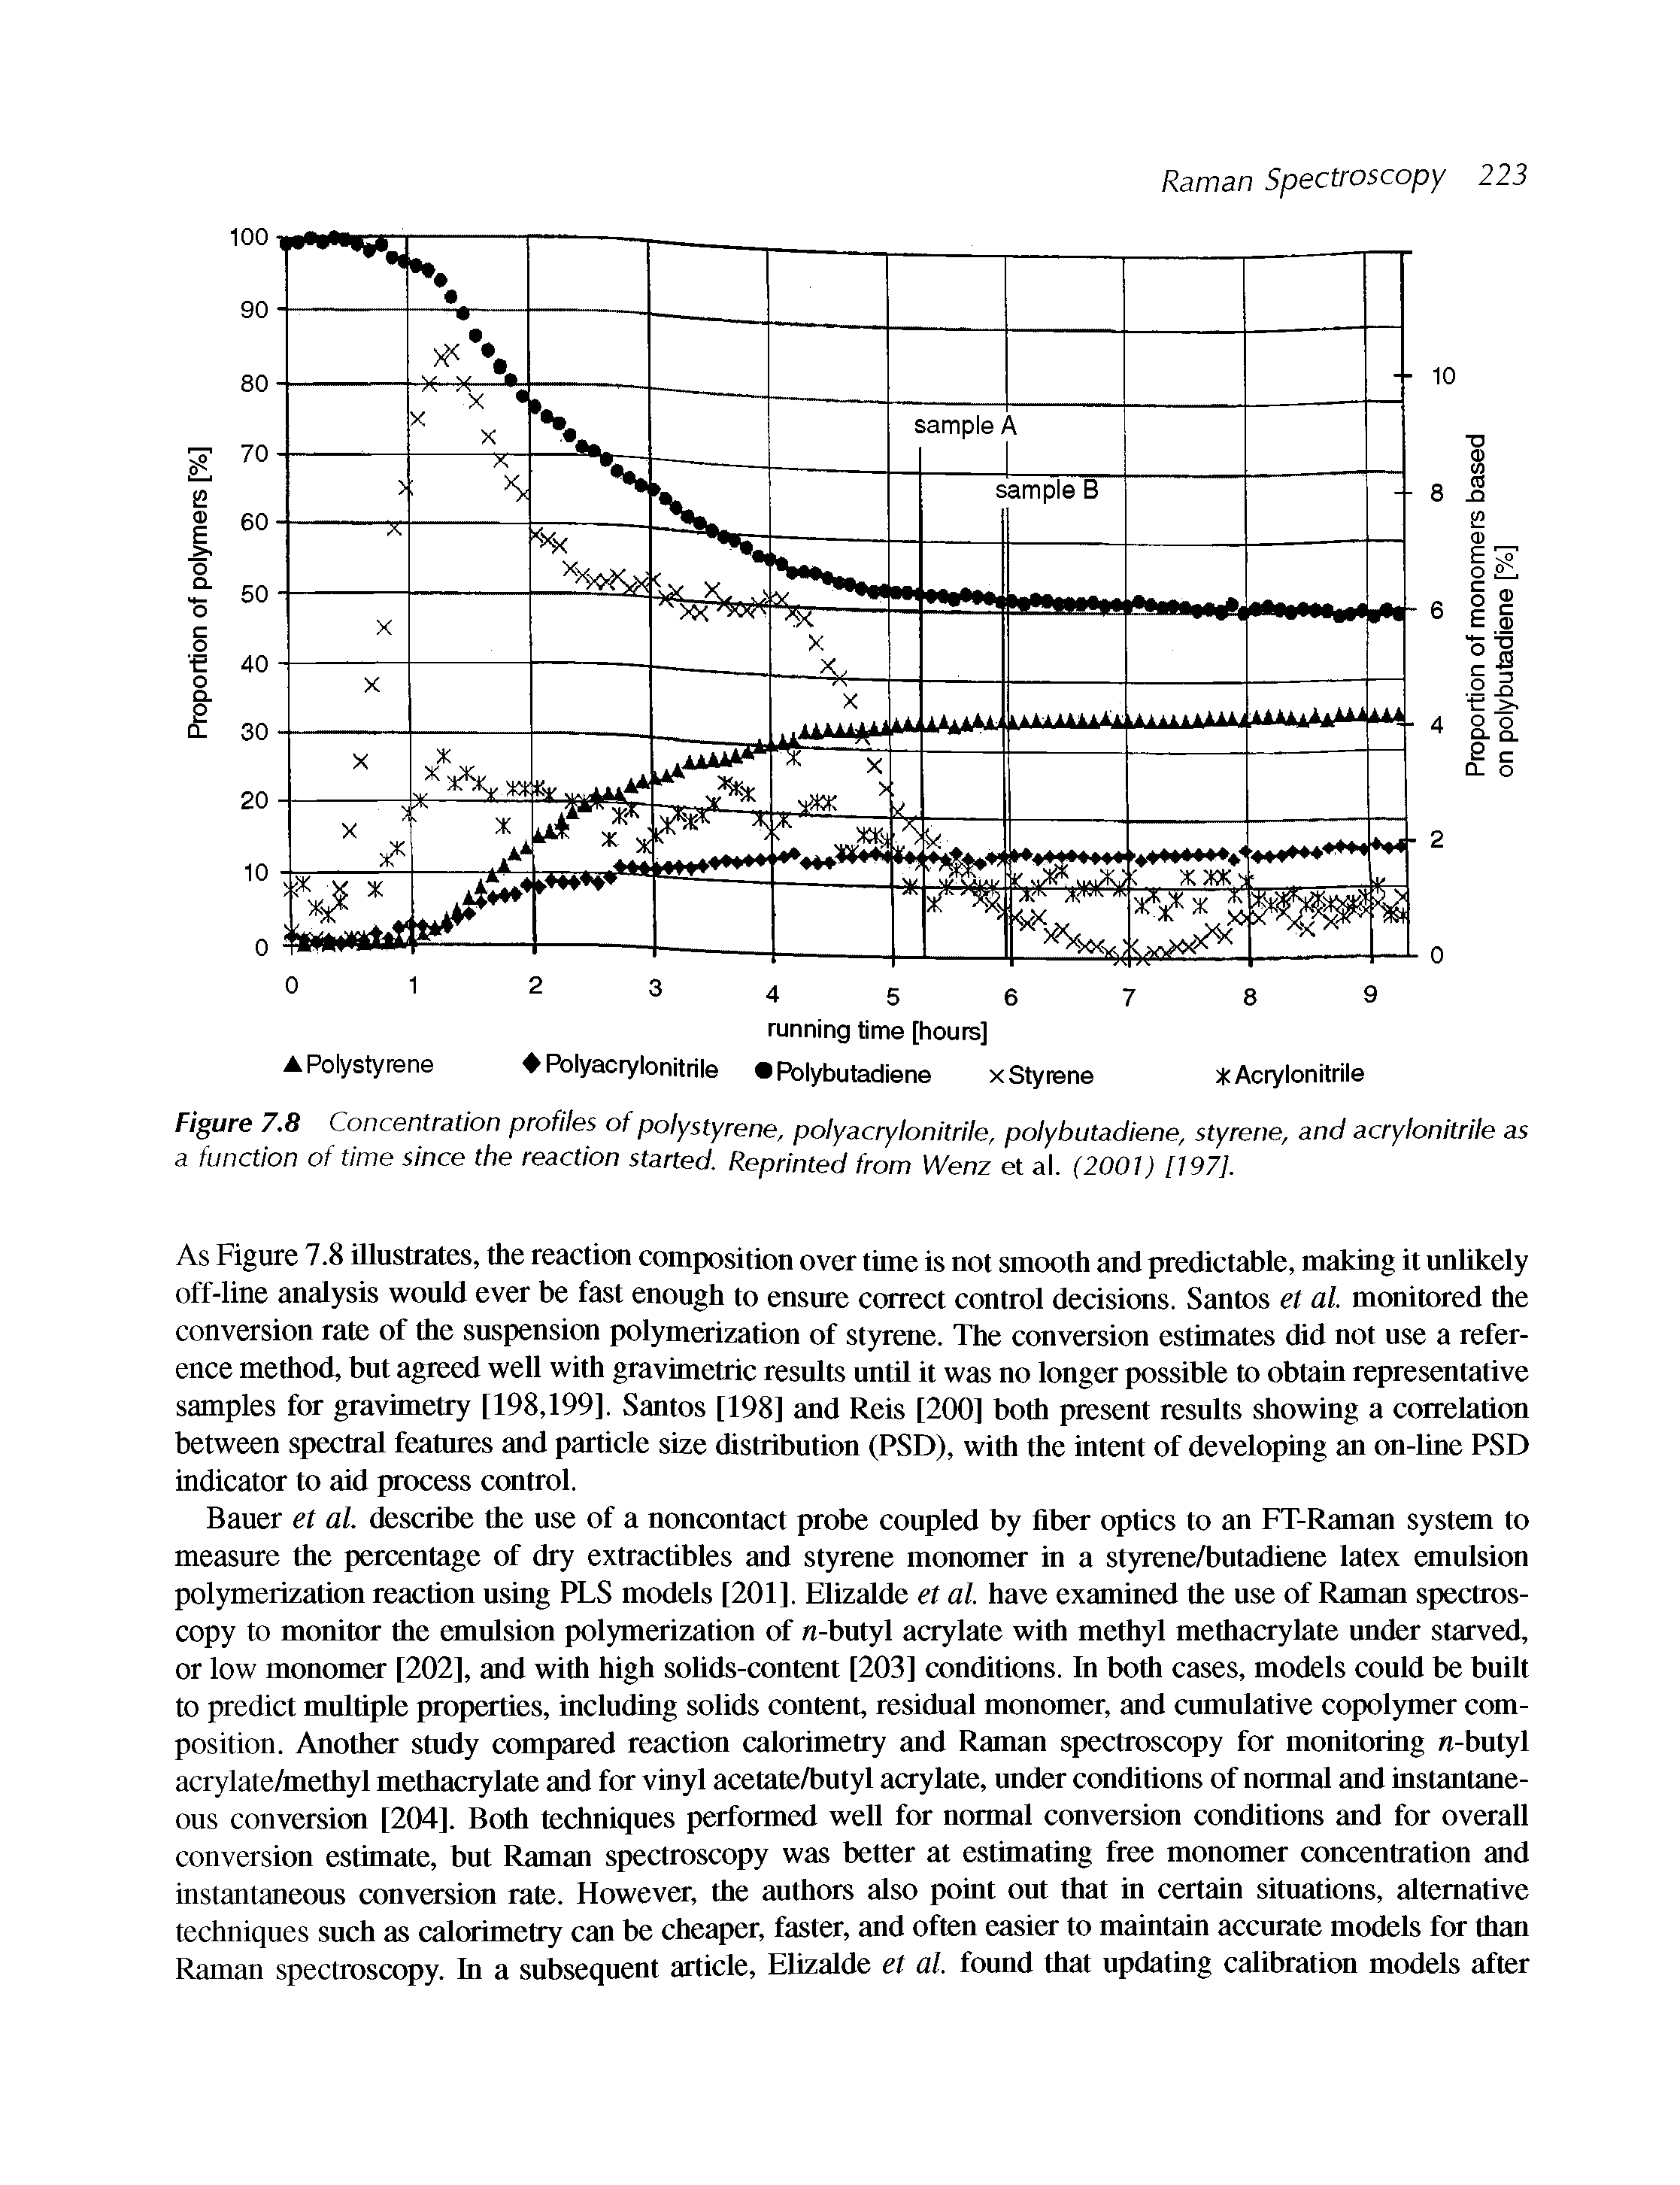 Figure 7.8 Concentration profiles of polystyrene, polyacrylonitrile, polybutadiene, styrene, and acrylonitrile as a function of time since the reaction started. Reprinted from Wenz et al. (2001) [197].